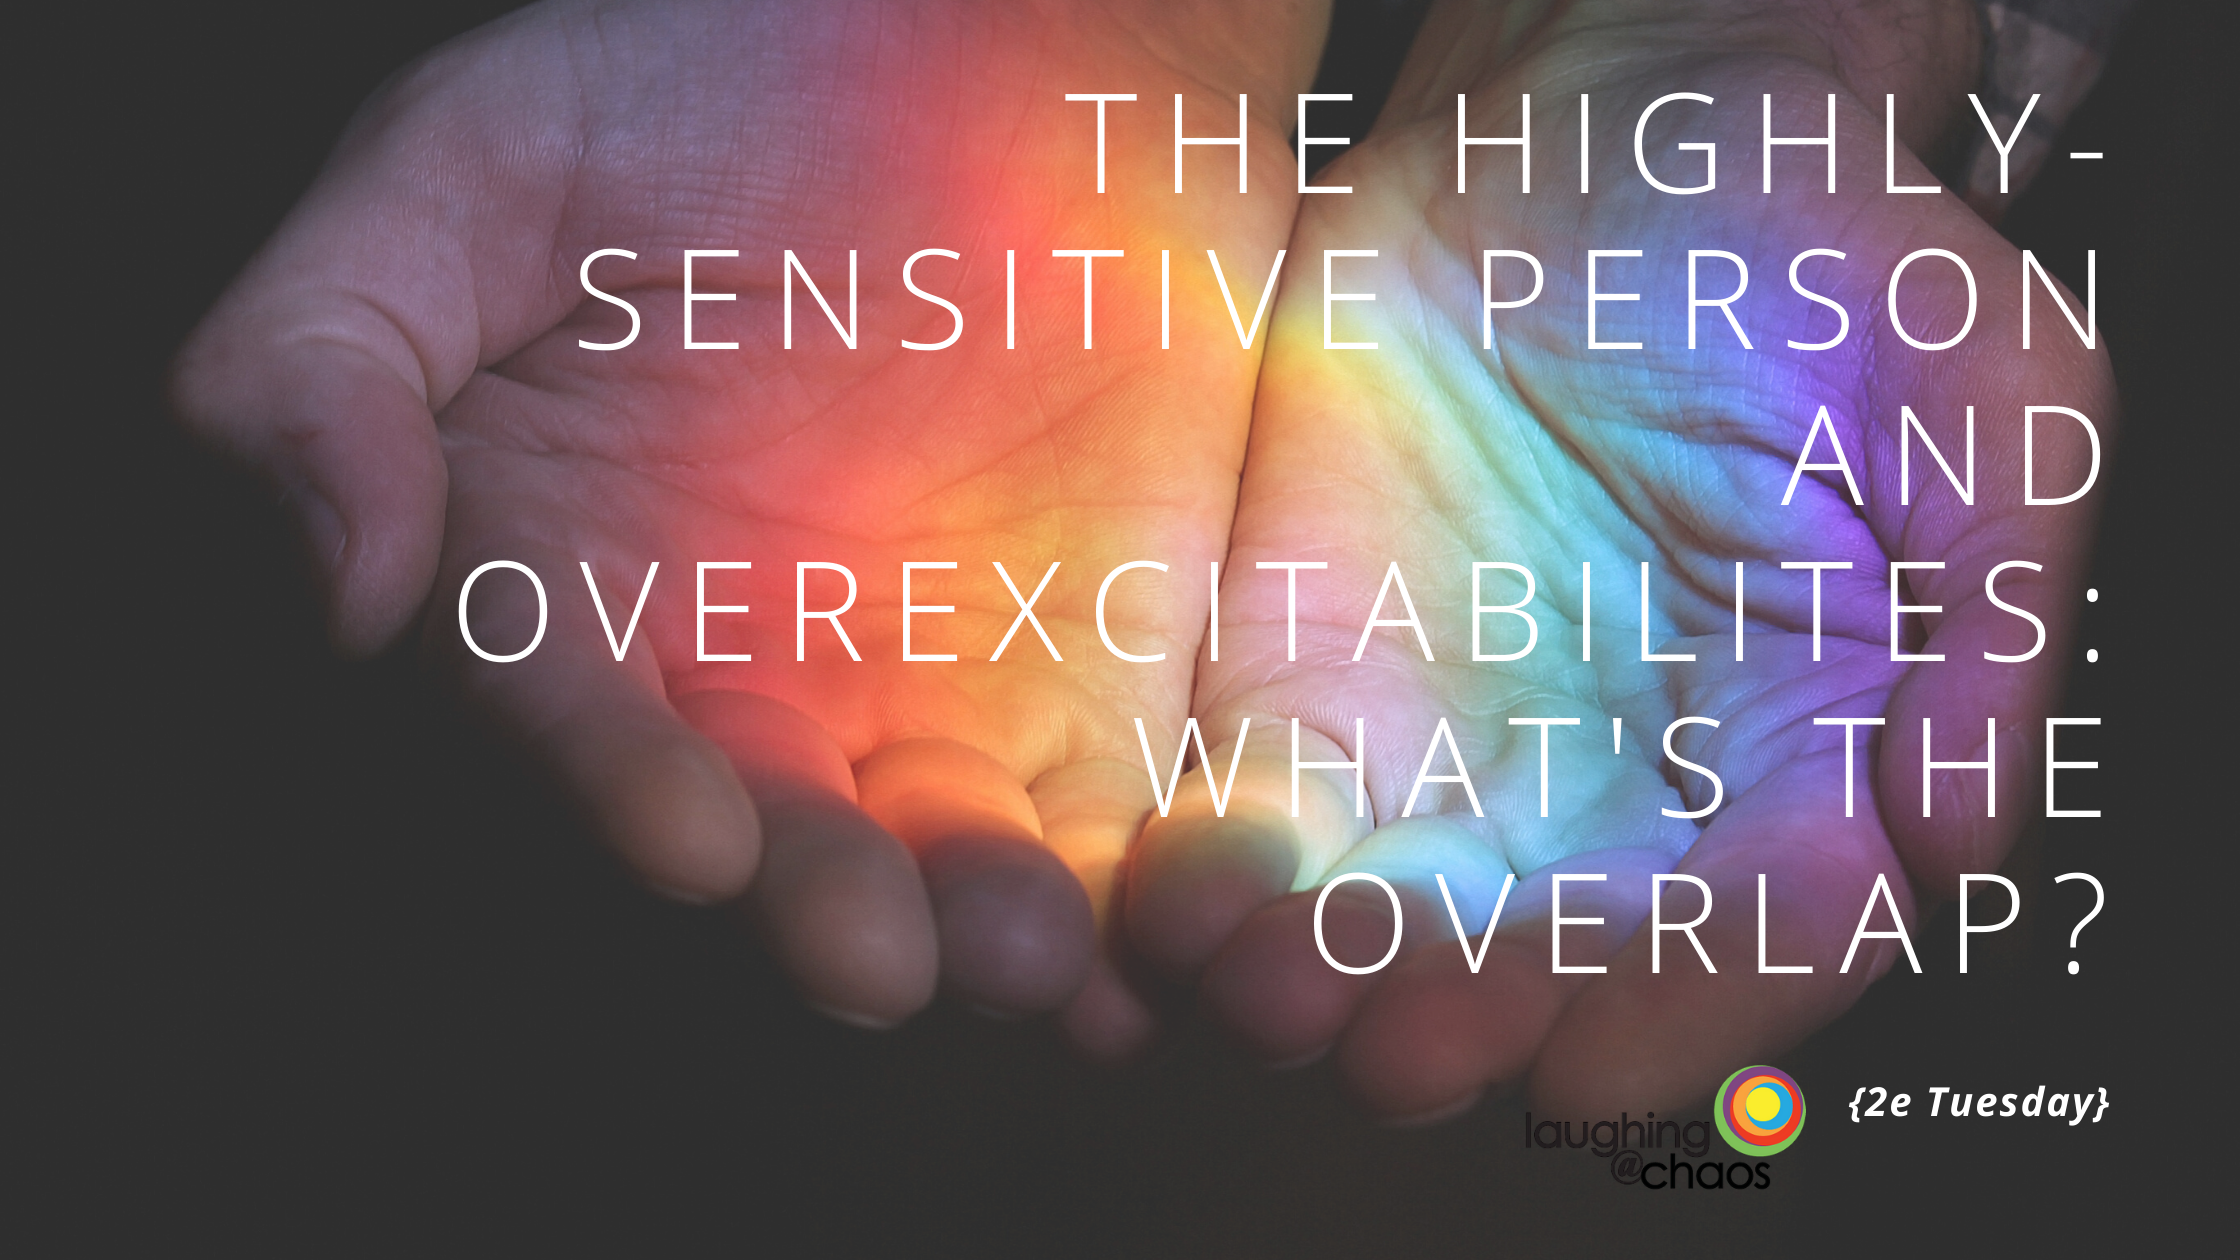 {2e Tuesday} The Highly-Sensitive Person and Overexcitabilites: What’s the Overlap?